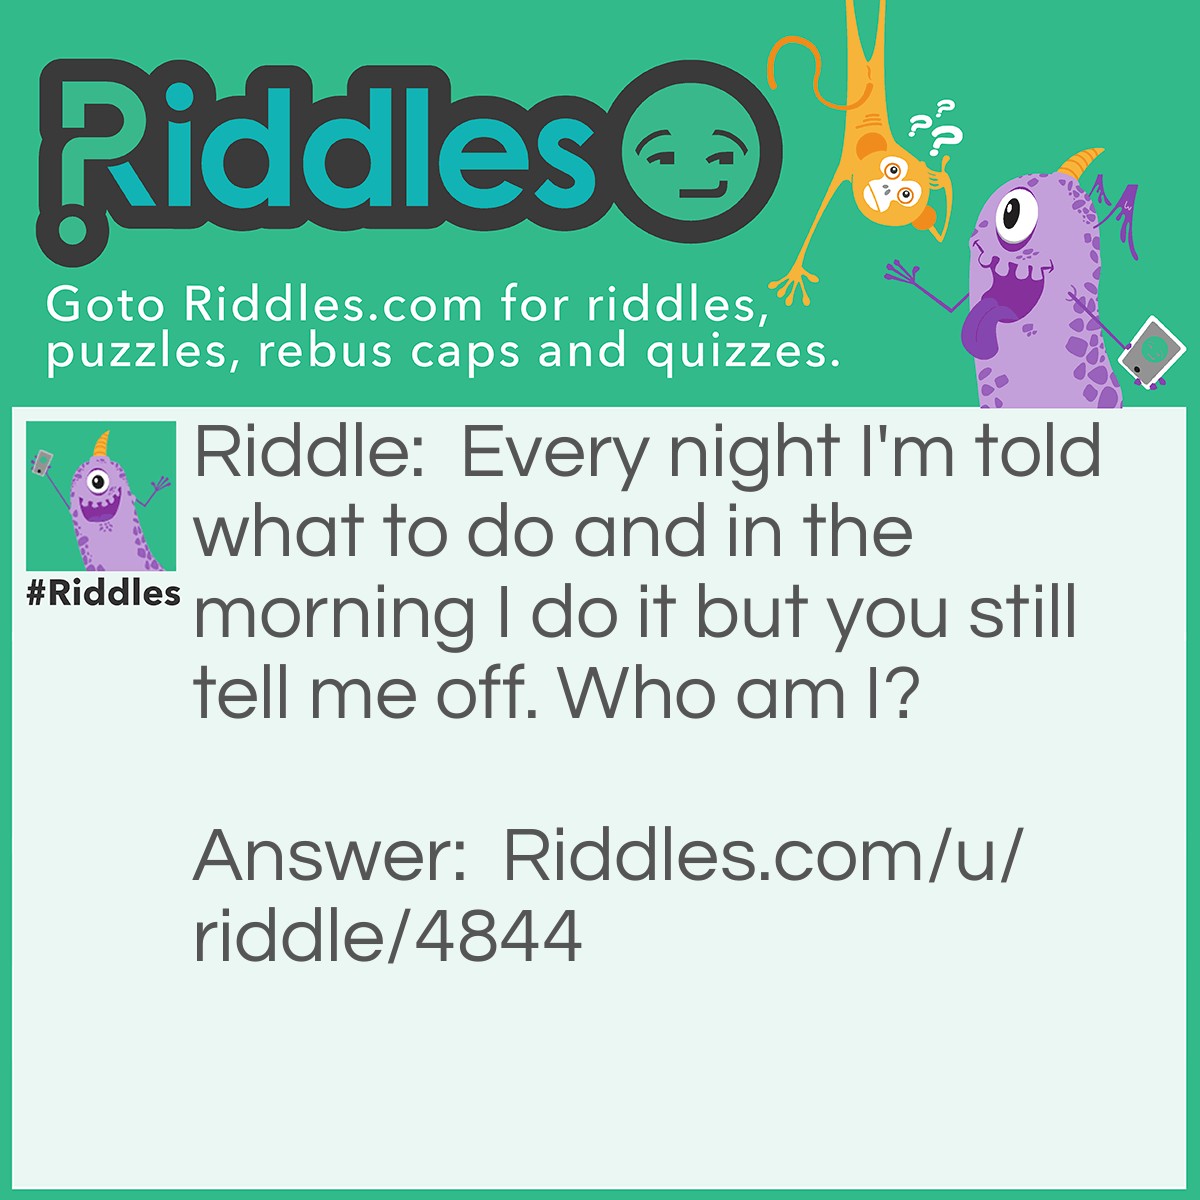 Riddle: Every night I'm told what to do and in the morning I do it but you still tell me off. Who am I? Answer: An alarm clock.